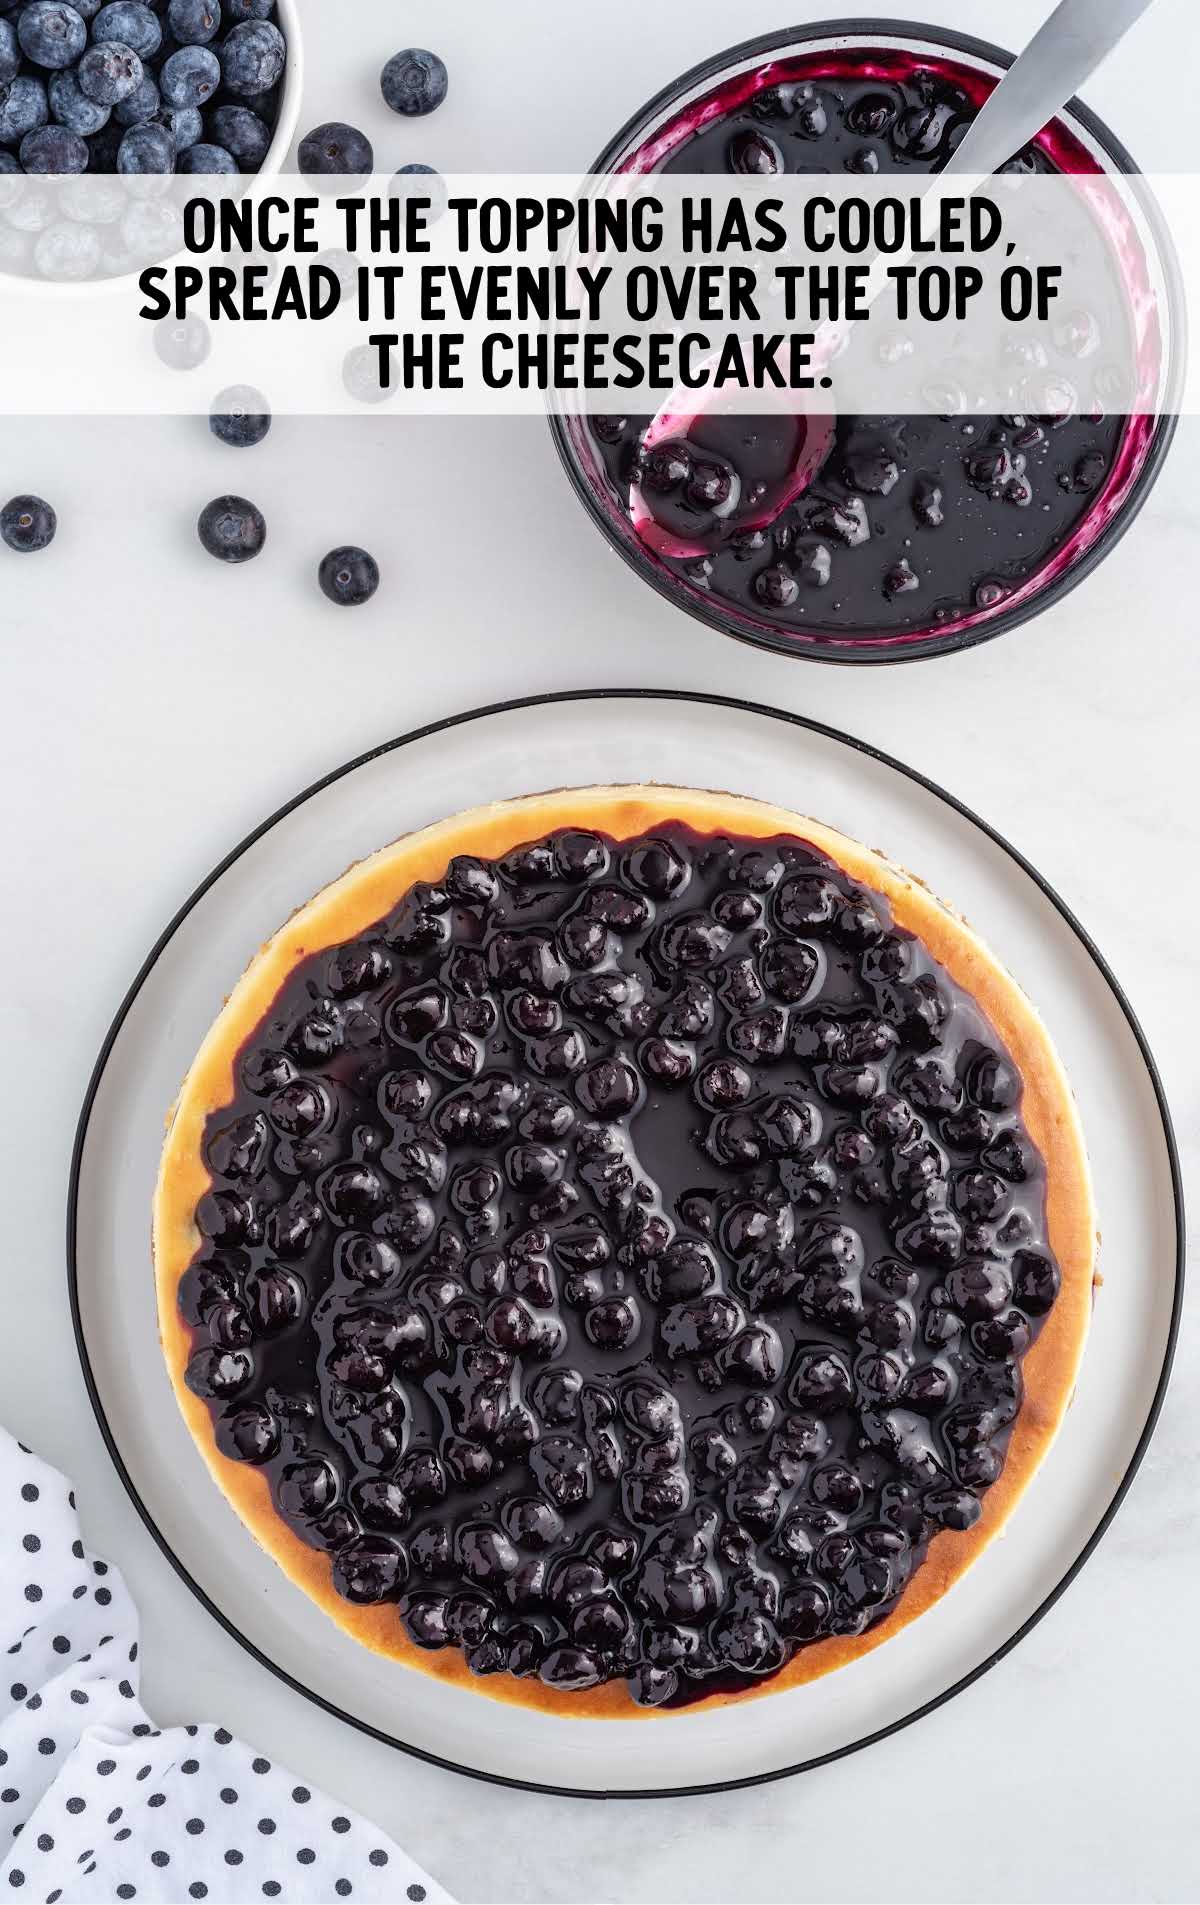 blueberries spread on top the cheesecake on a plate